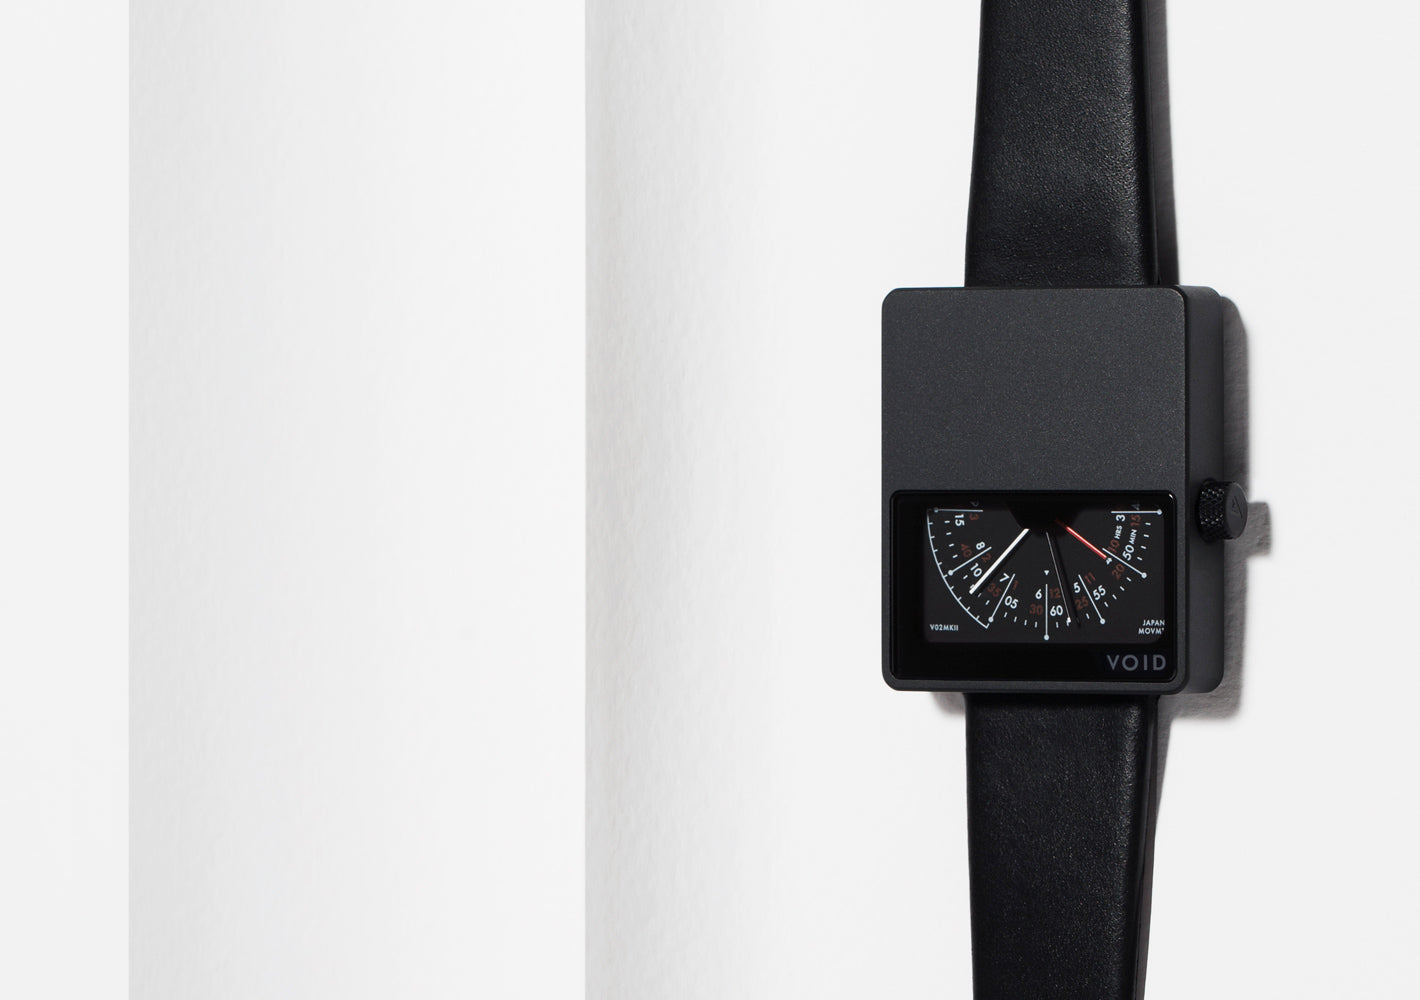 The V02MKII-BL/BL from VOID Watches, designed by David Ericsson.